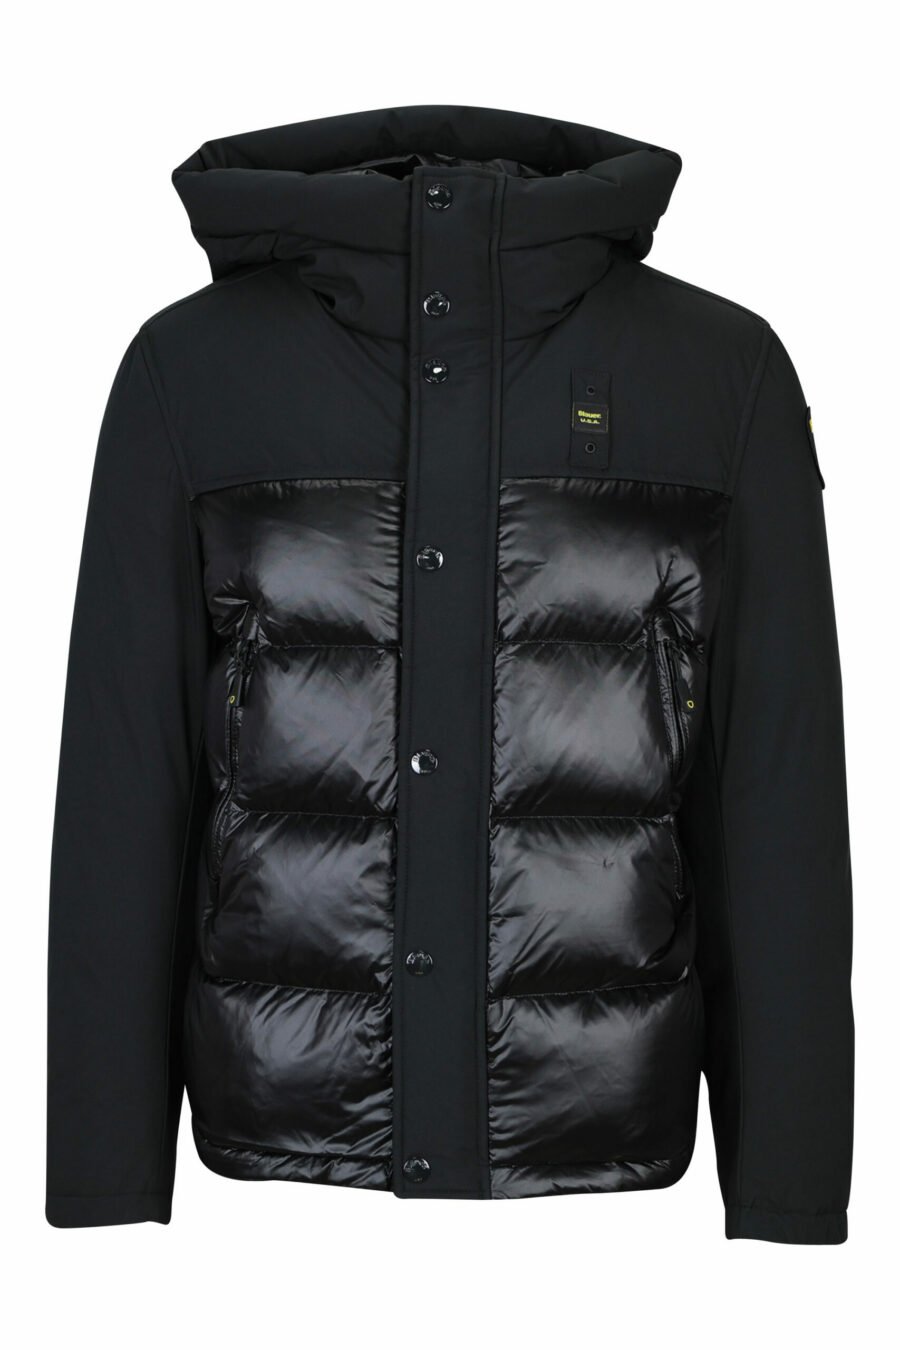 Black mix hooded jacket with logo patch - 8058610657222 scaled